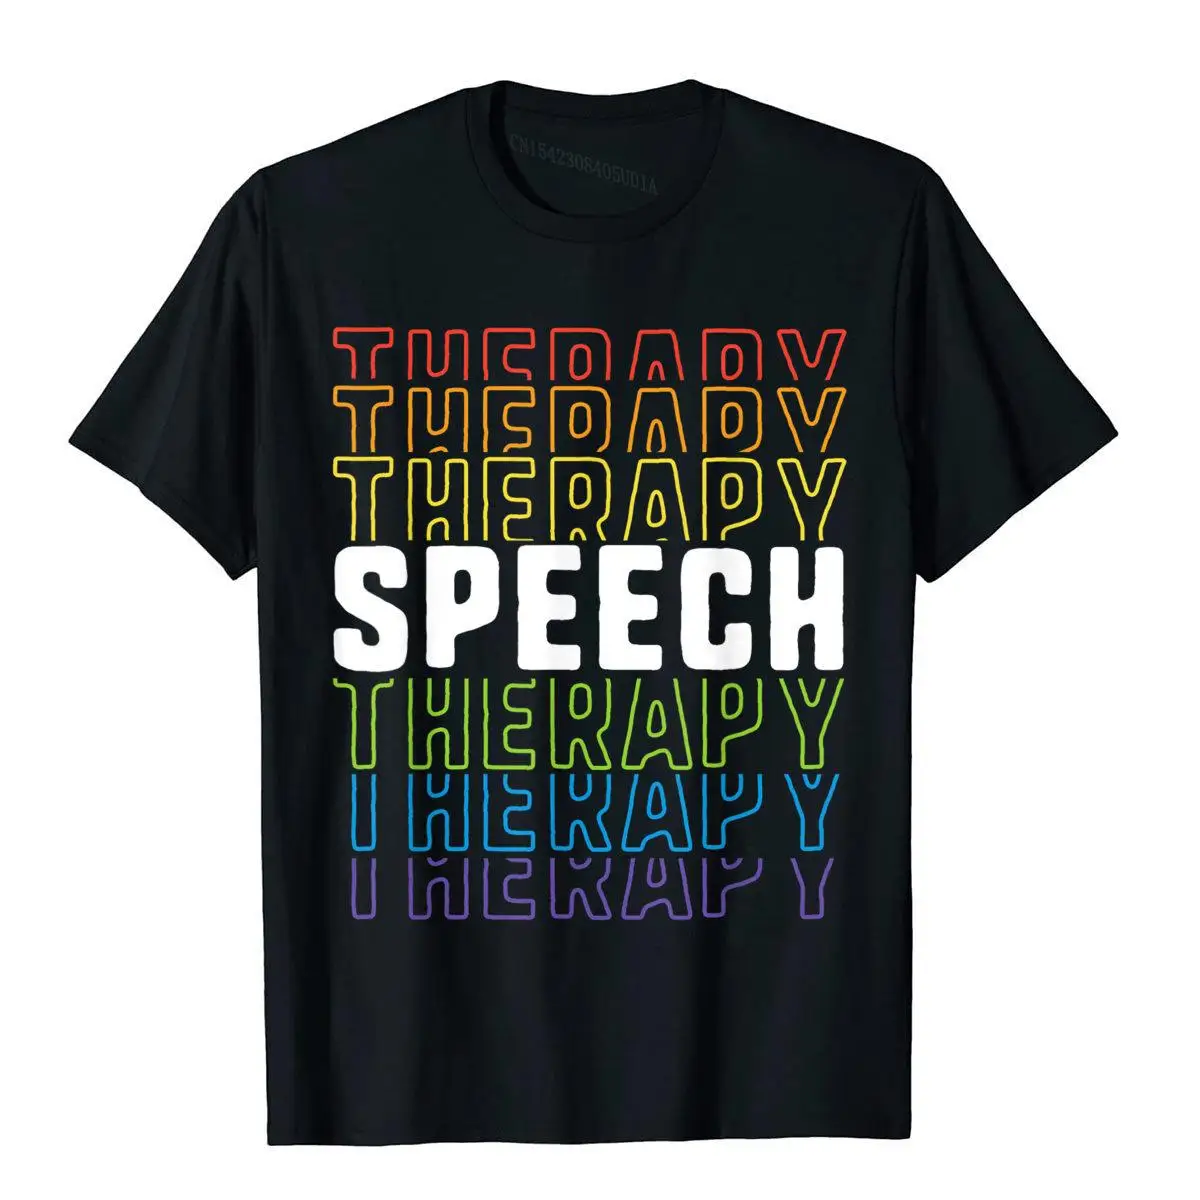 

Speech Therapy School Therapist SLP Language Pathologist T-Shirt Classic Top T-Shirts For Men Cotton Tops & Tees Europe Brand